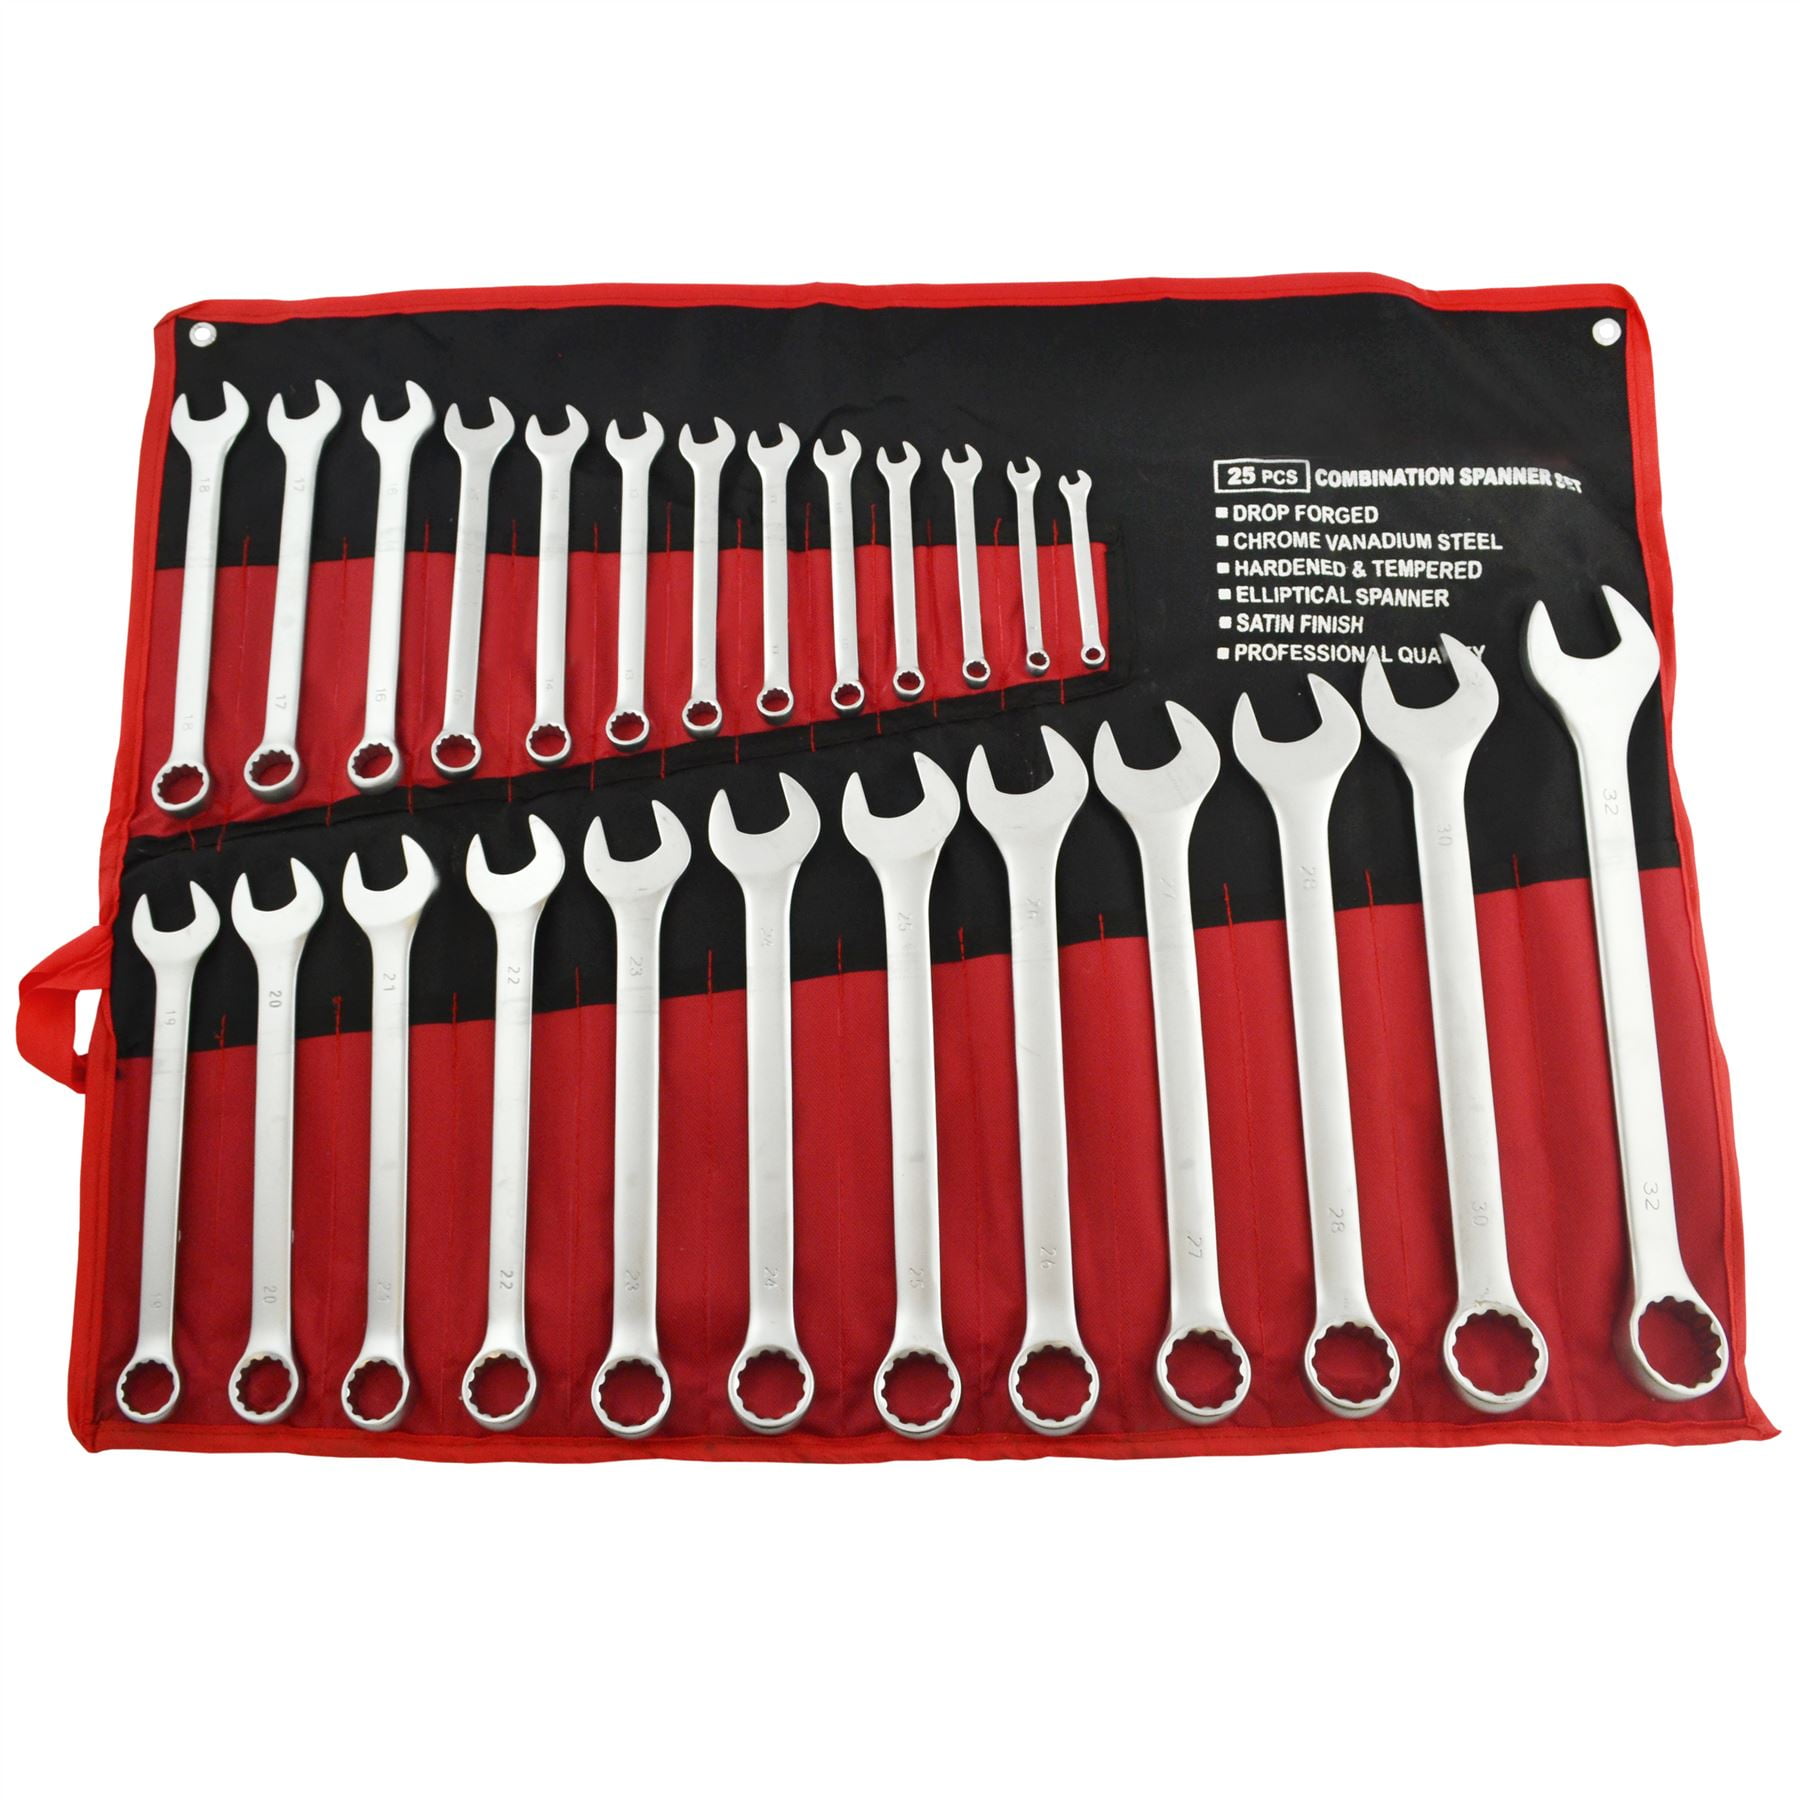 70-965E Stanley Combination Ring & Open End Spanner Set 6-32mm Set Of 23pcs  at Rs 2061/piece | Combination Spanner in Chennai | ID: 20426018112